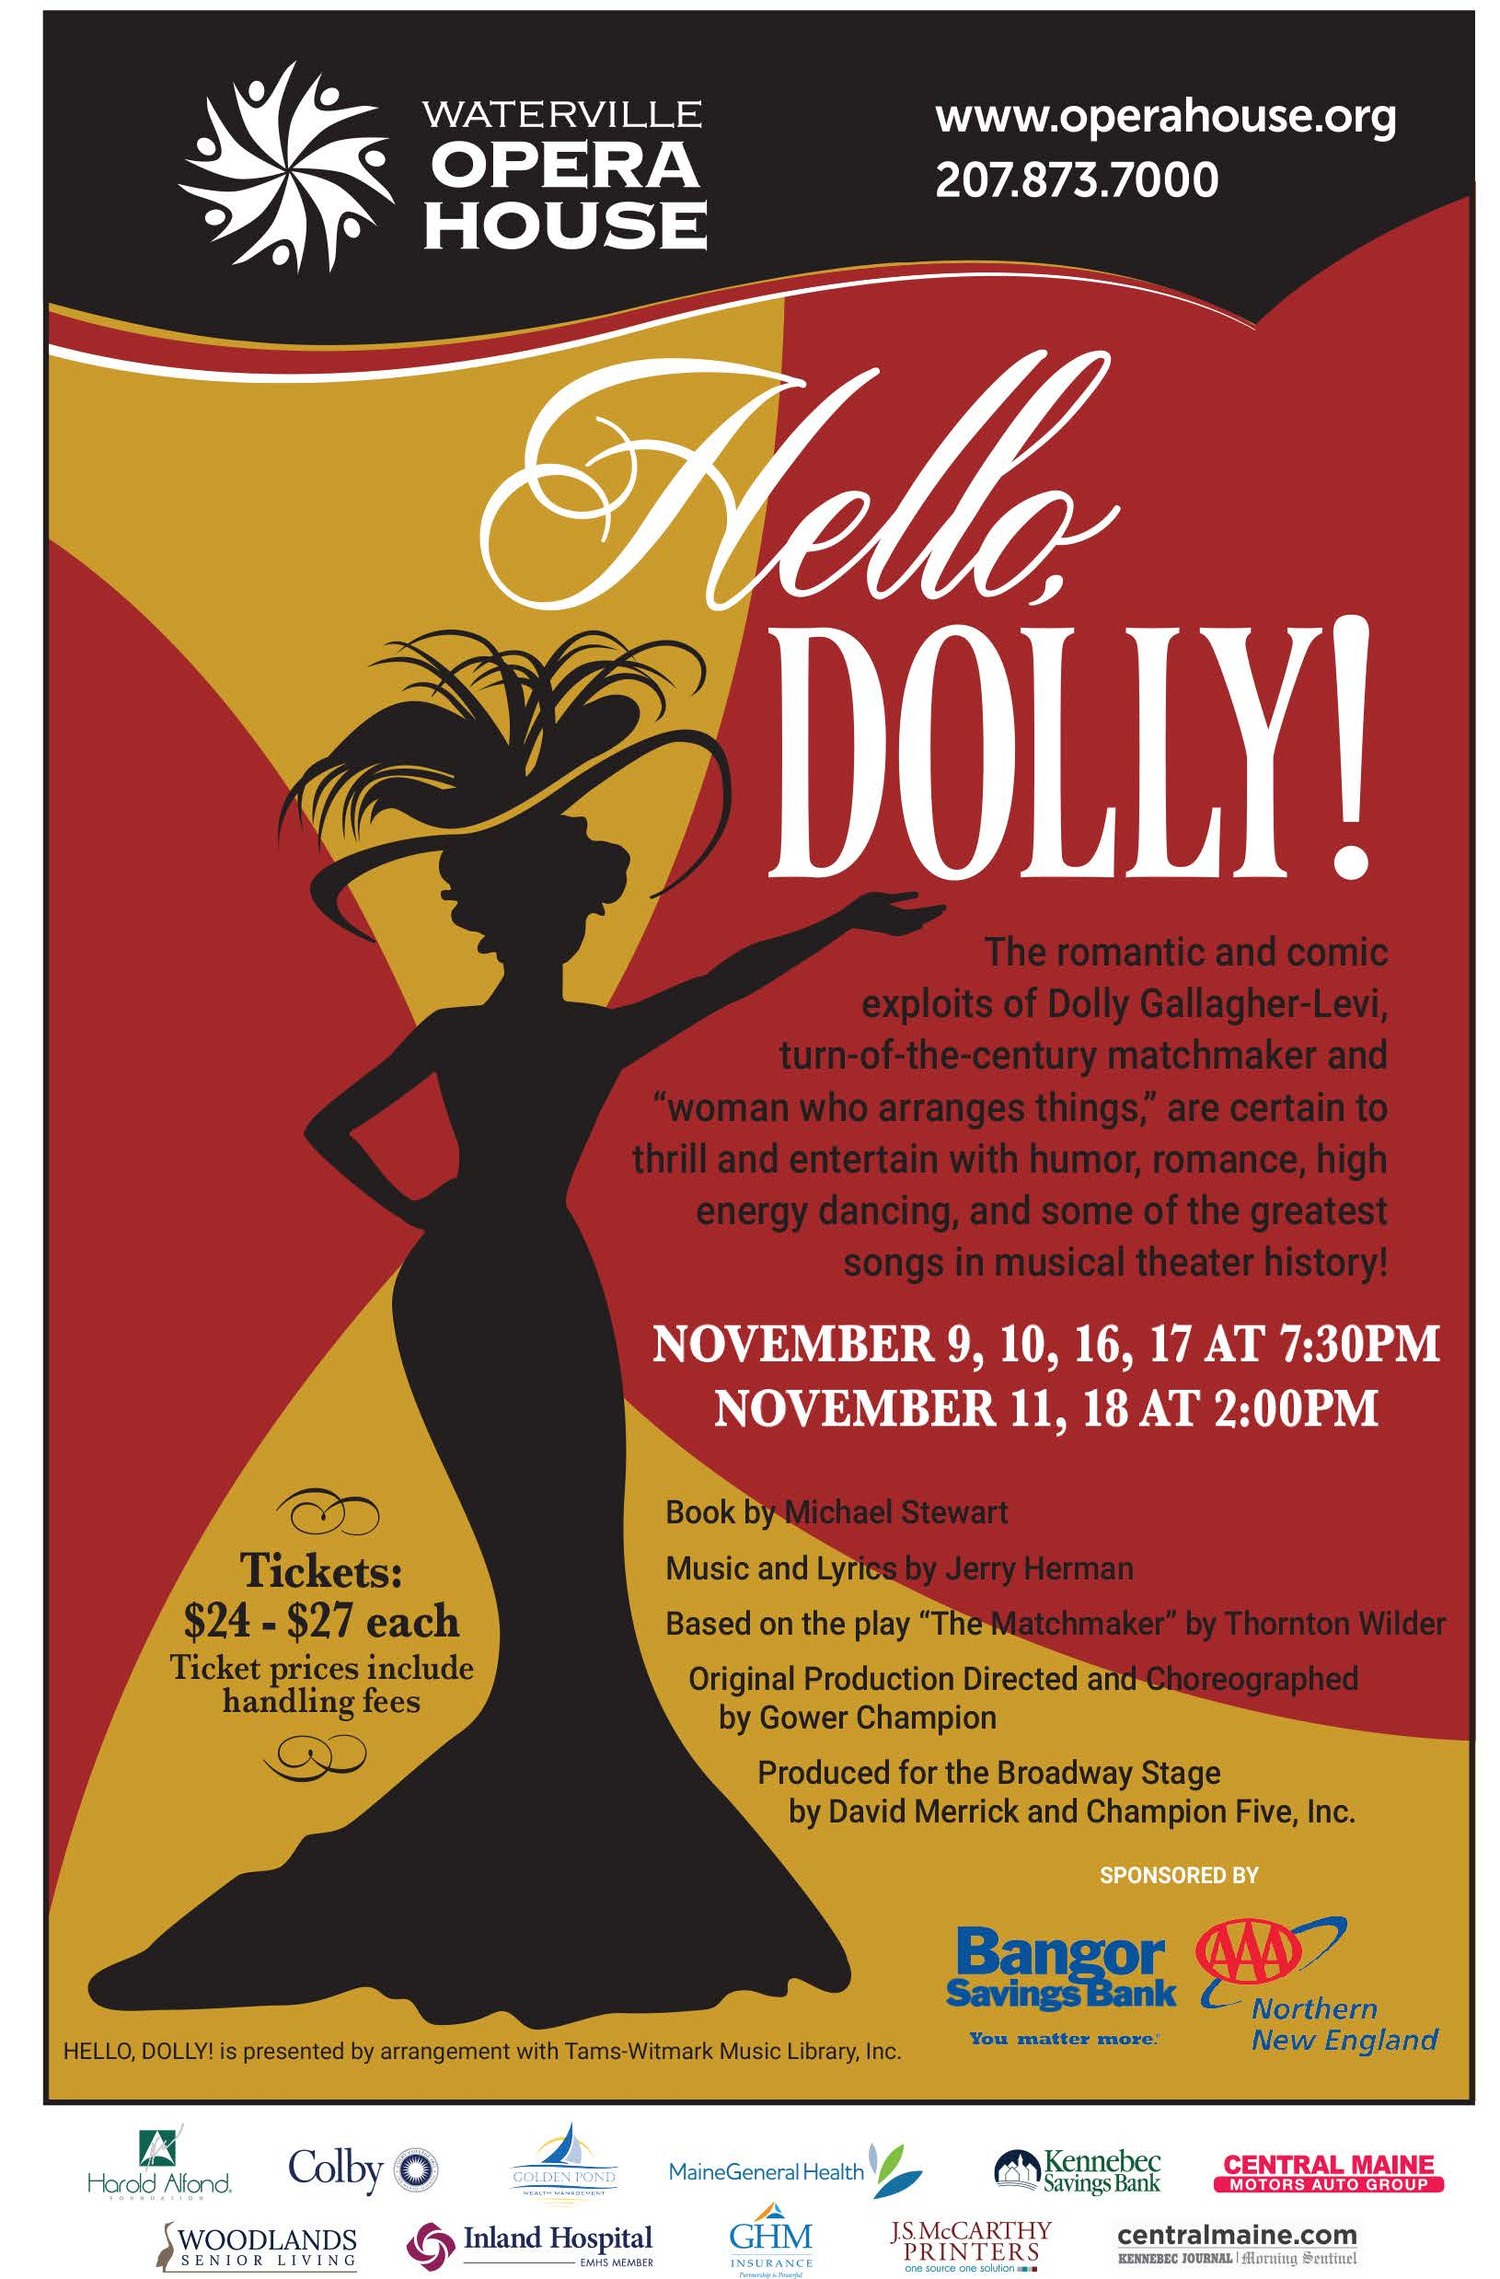 The romantic and comic exploits of Dolly Gallagher-Levi, turn-of-the-century matchmaker and “woman who arranges things,” are certain to thrill and entertain with humor, romance, high energy dancing, and some of the greatest songs in musical theater history!